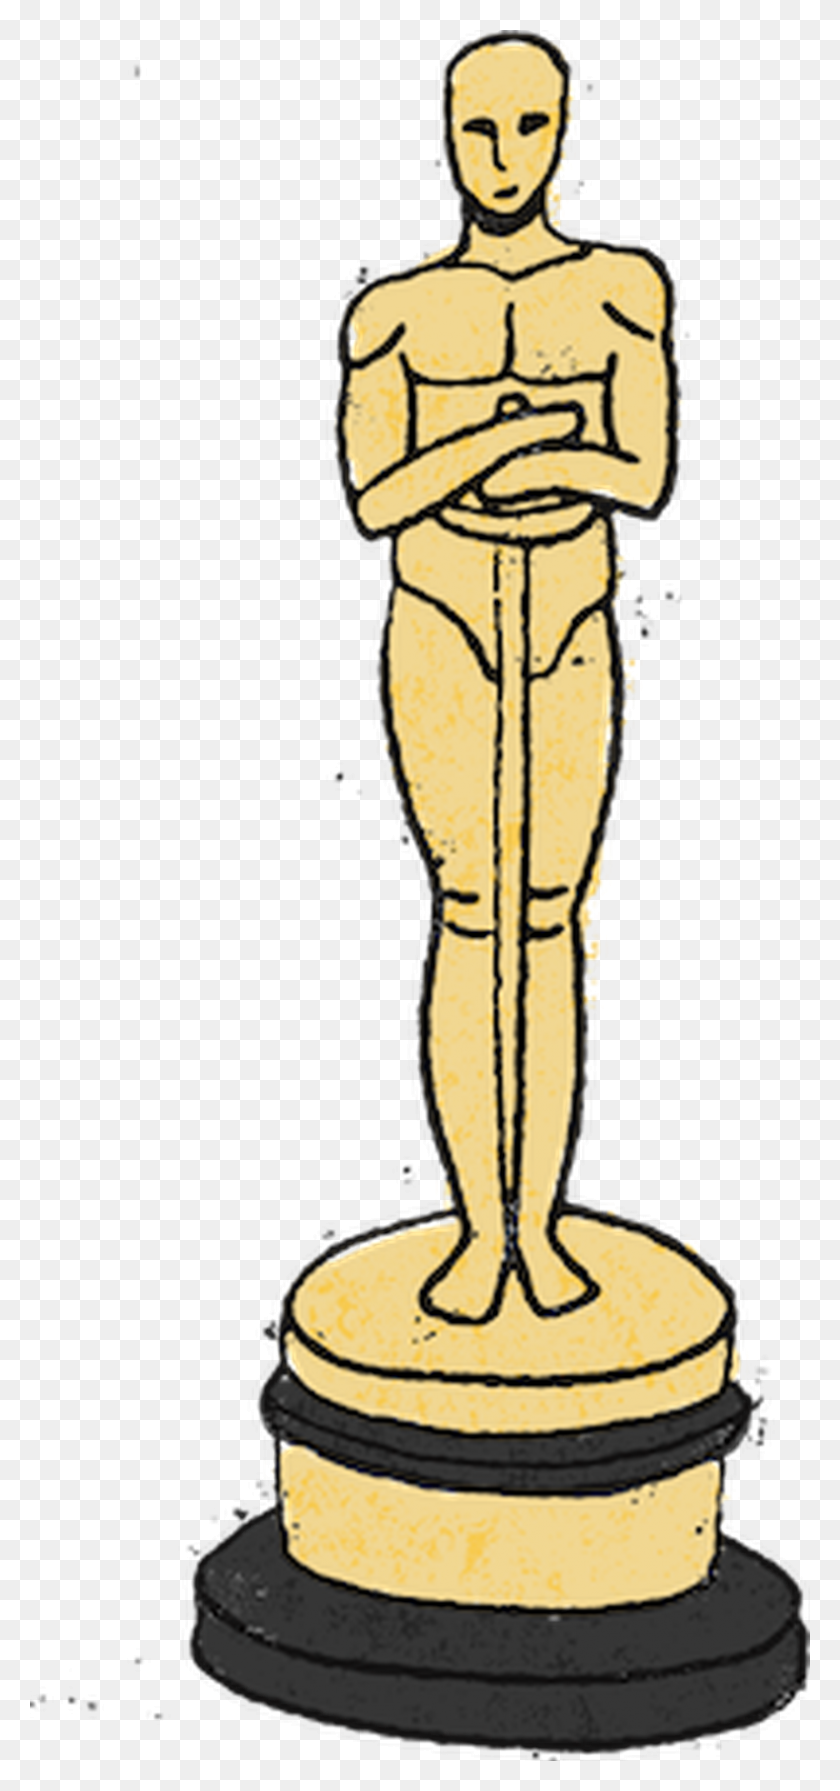 790x1754 Everything You'd Ever Need To Know About The Oscars - Academy Award Clip Art